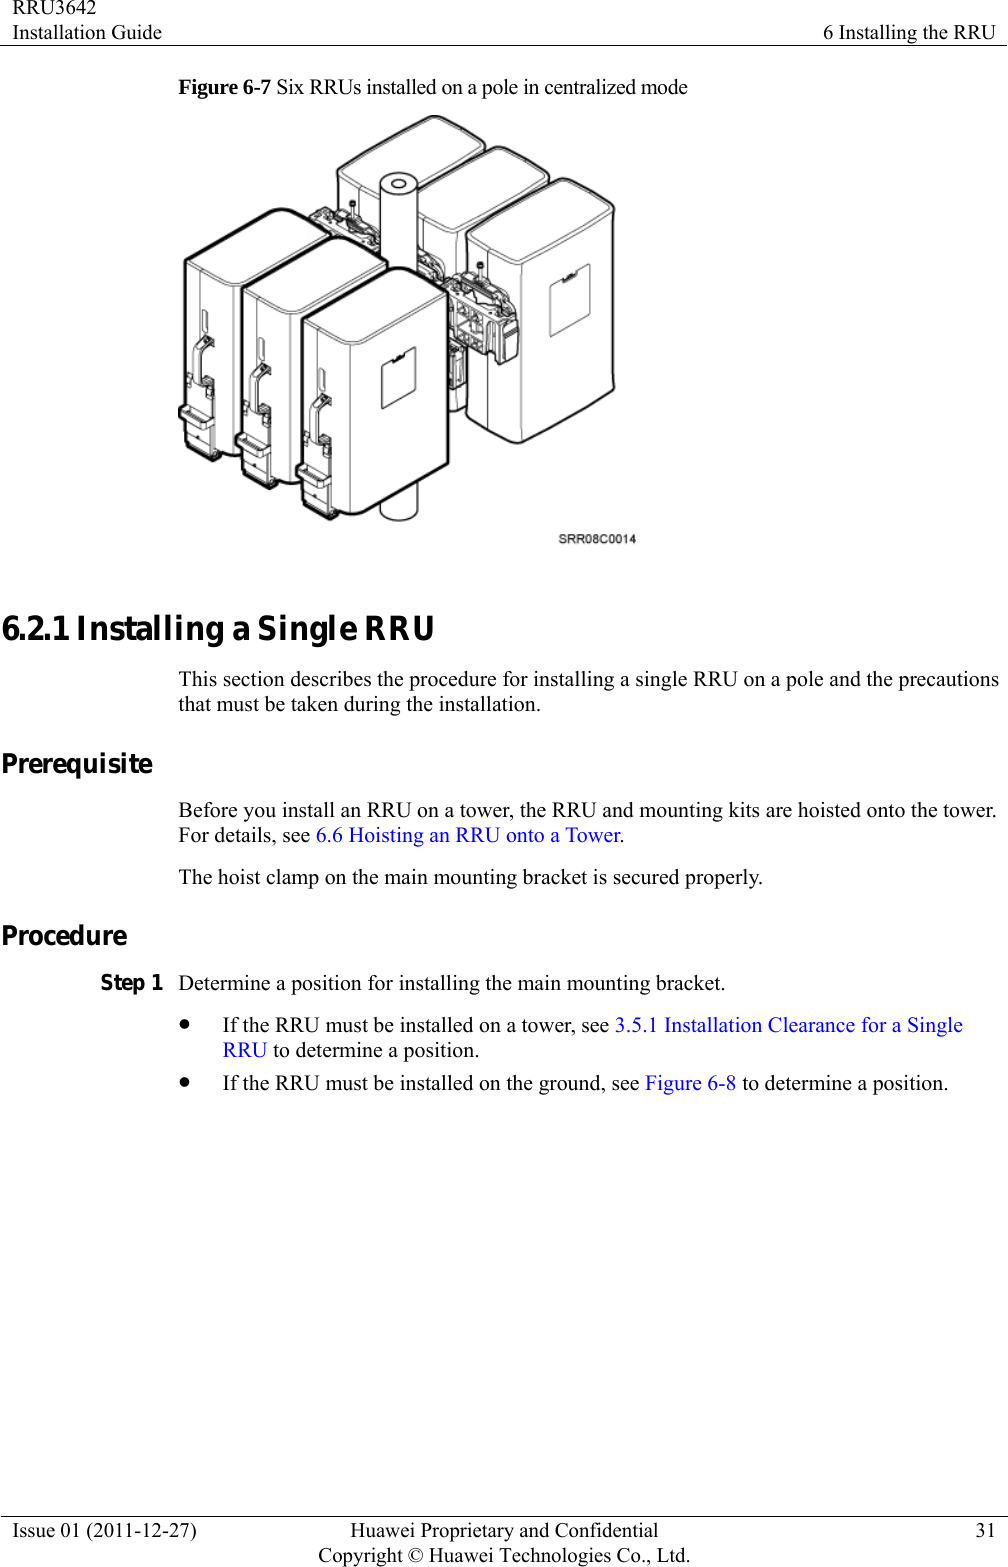 RRU3642 Installation Guide  6 Installing the RRU Issue 01 (2011-12-27)  Huawei Proprietary and Confidential         Copyright © Huawei Technologies Co., Ltd.31 Figure 6-7 Six RRUs installed on a pole in centralized mode   6.2.1 Installing a Single RRU This section describes the procedure for installing a single RRU on a pole and the precautions that must be taken during the installation. Prerequisite Before you install an RRU on a tower, the RRU and mounting kits are hoisted onto the tower. For details, see 6.6 Hoisting an RRU onto a Tower. The hoist clamp on the main mounting bracket is secured properly. Procedure Step 1 Determine a position for installing the main mounting bracket. z If the RRU must be installed on a tower, see 3.5.1 Installation Clearance for a Single RRU to determine a position. z If the RRU must be installed on the ground, see Figure 6-8 to determine a position. 